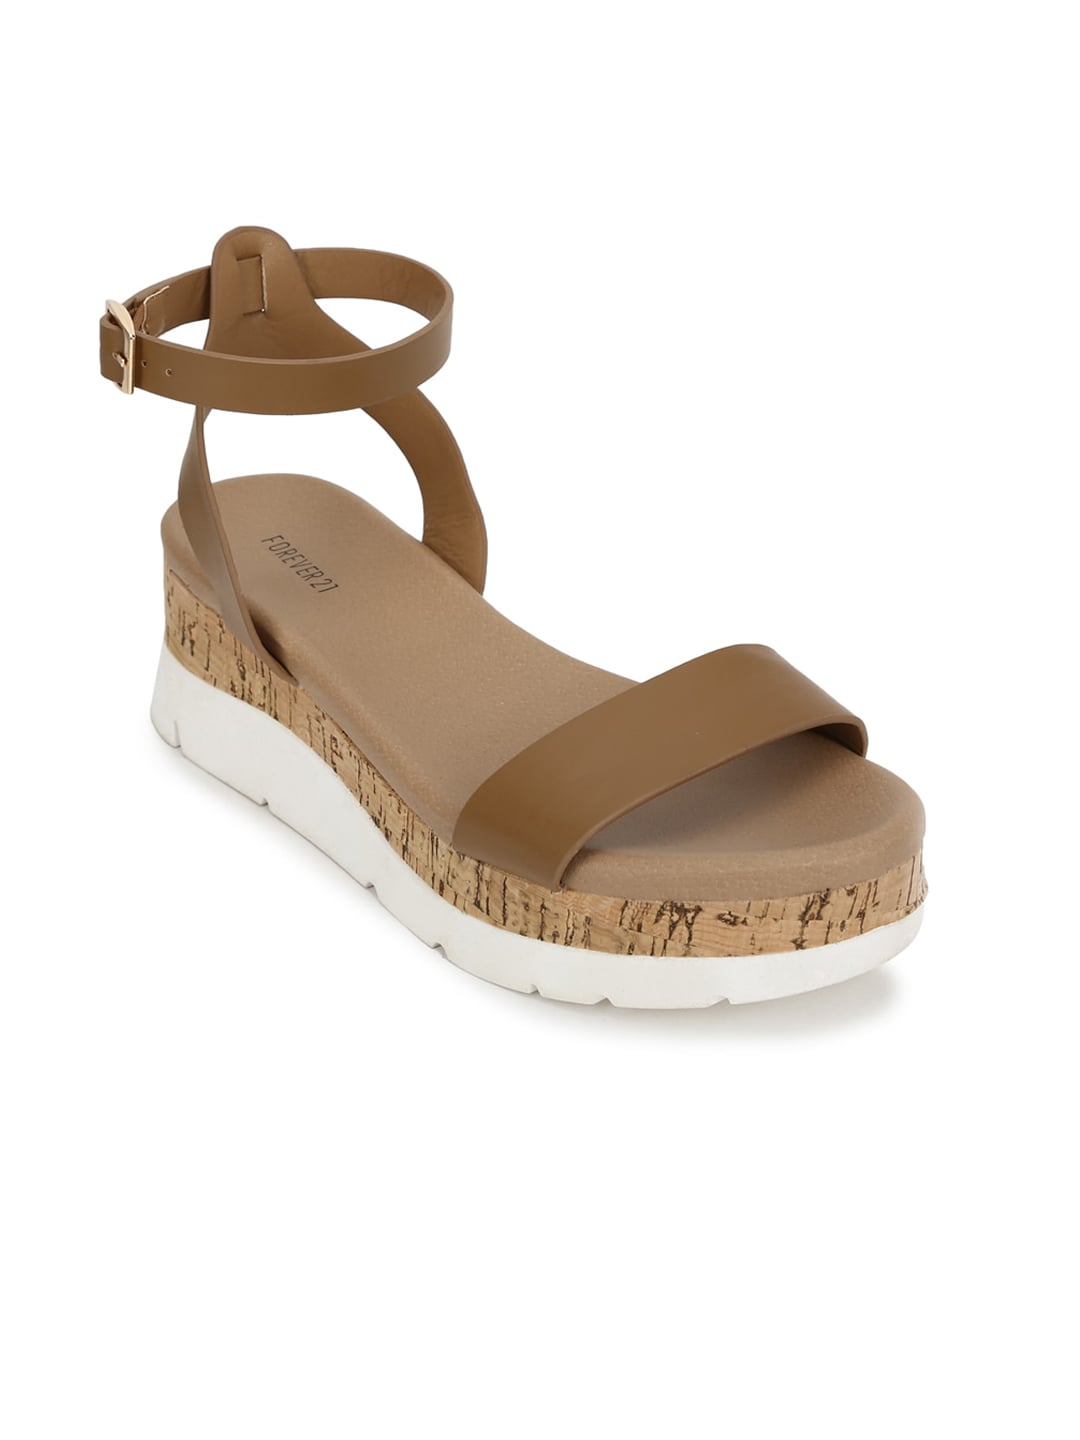 FOREVER 21 Brown & White Solid PU Platform Sandals Price in India